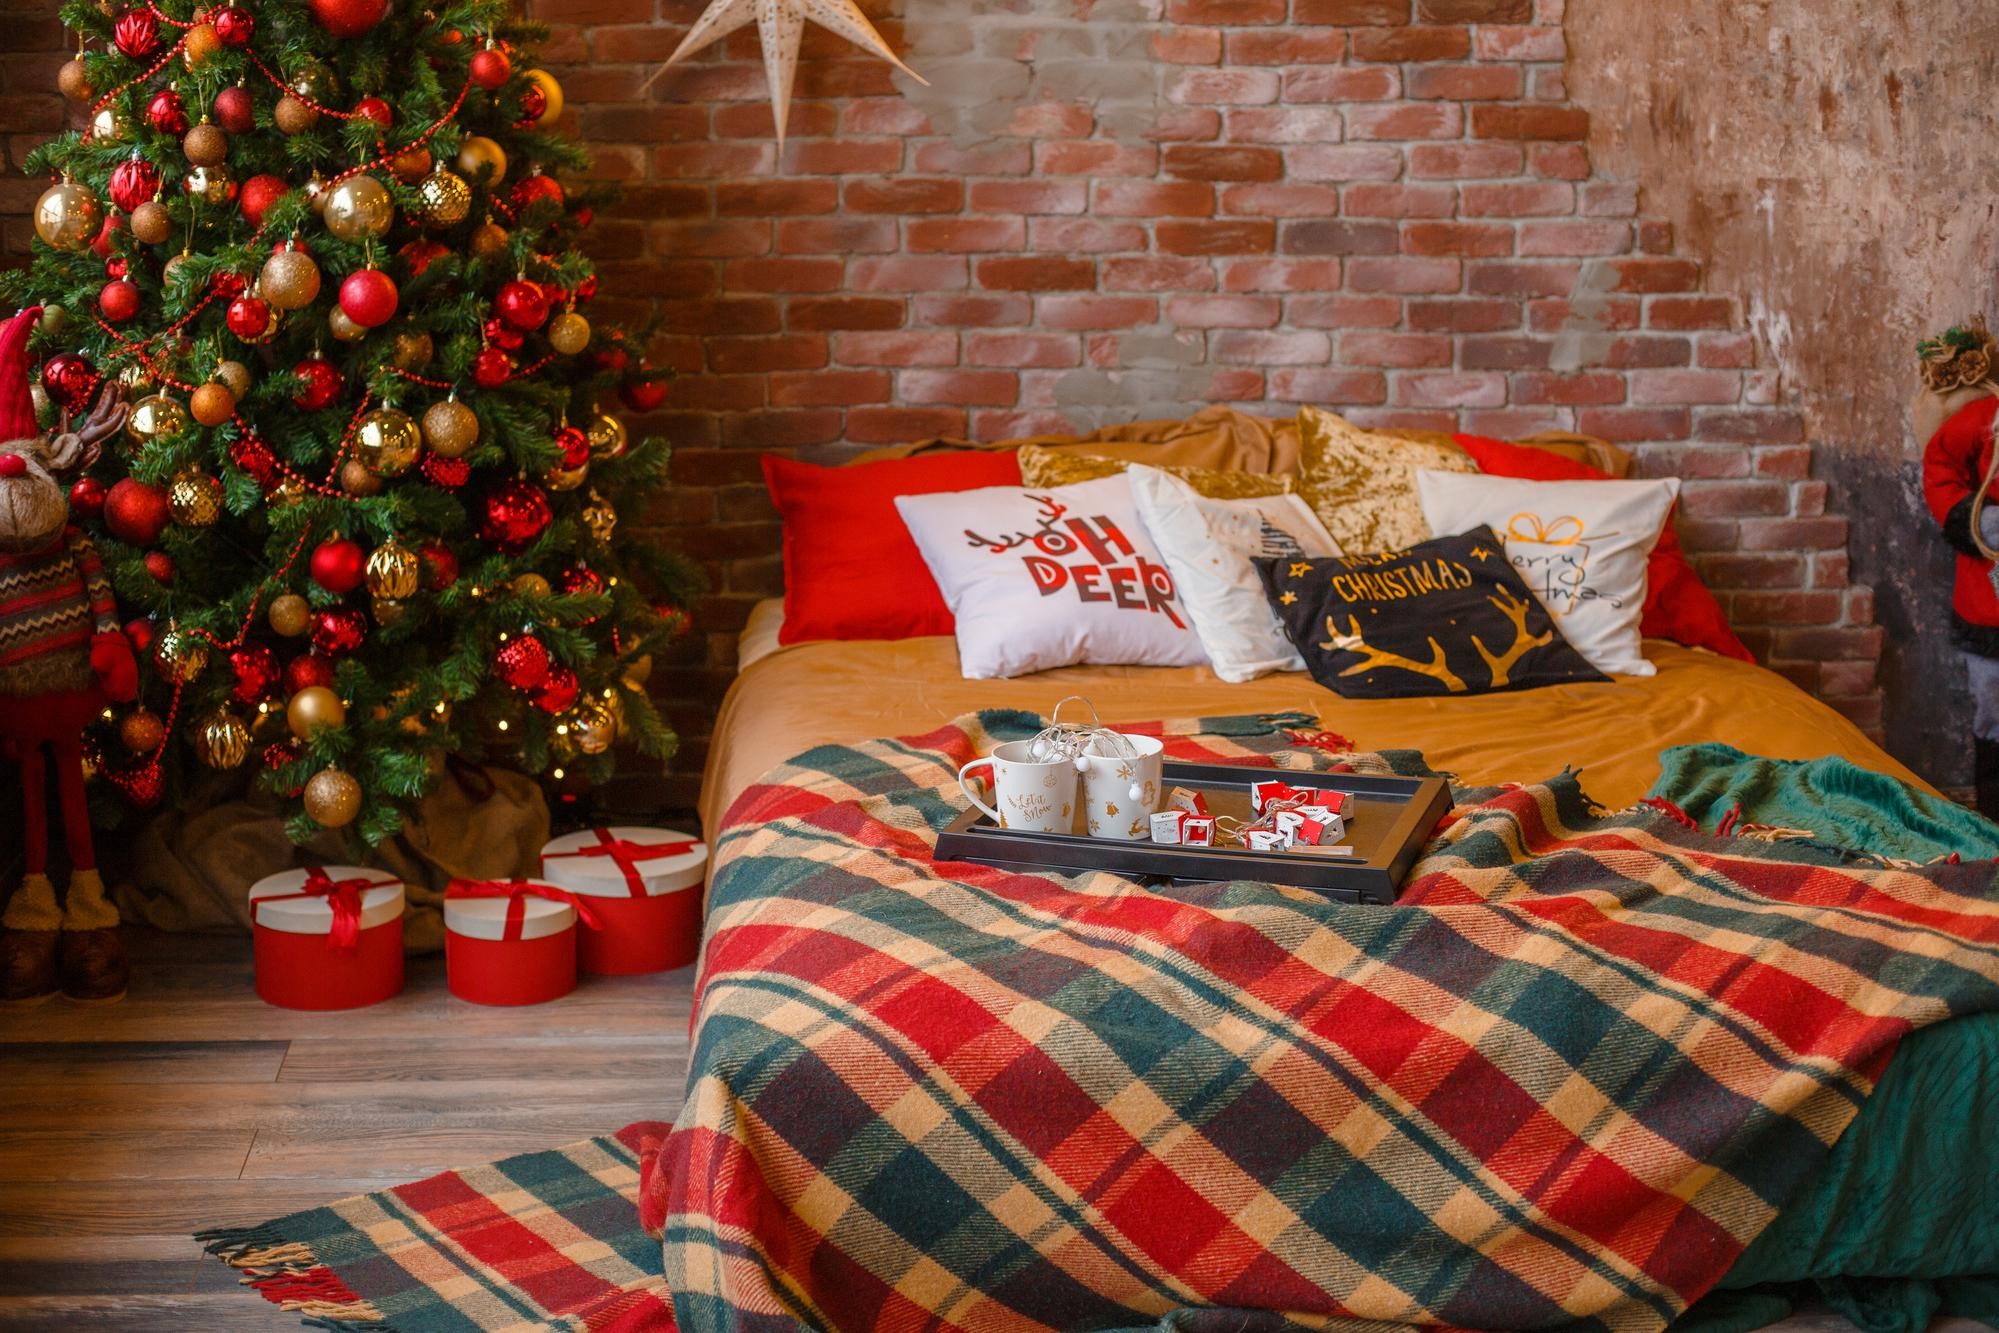 Your bedroom can turn into a winter wonderland too with these festive decor ideas.